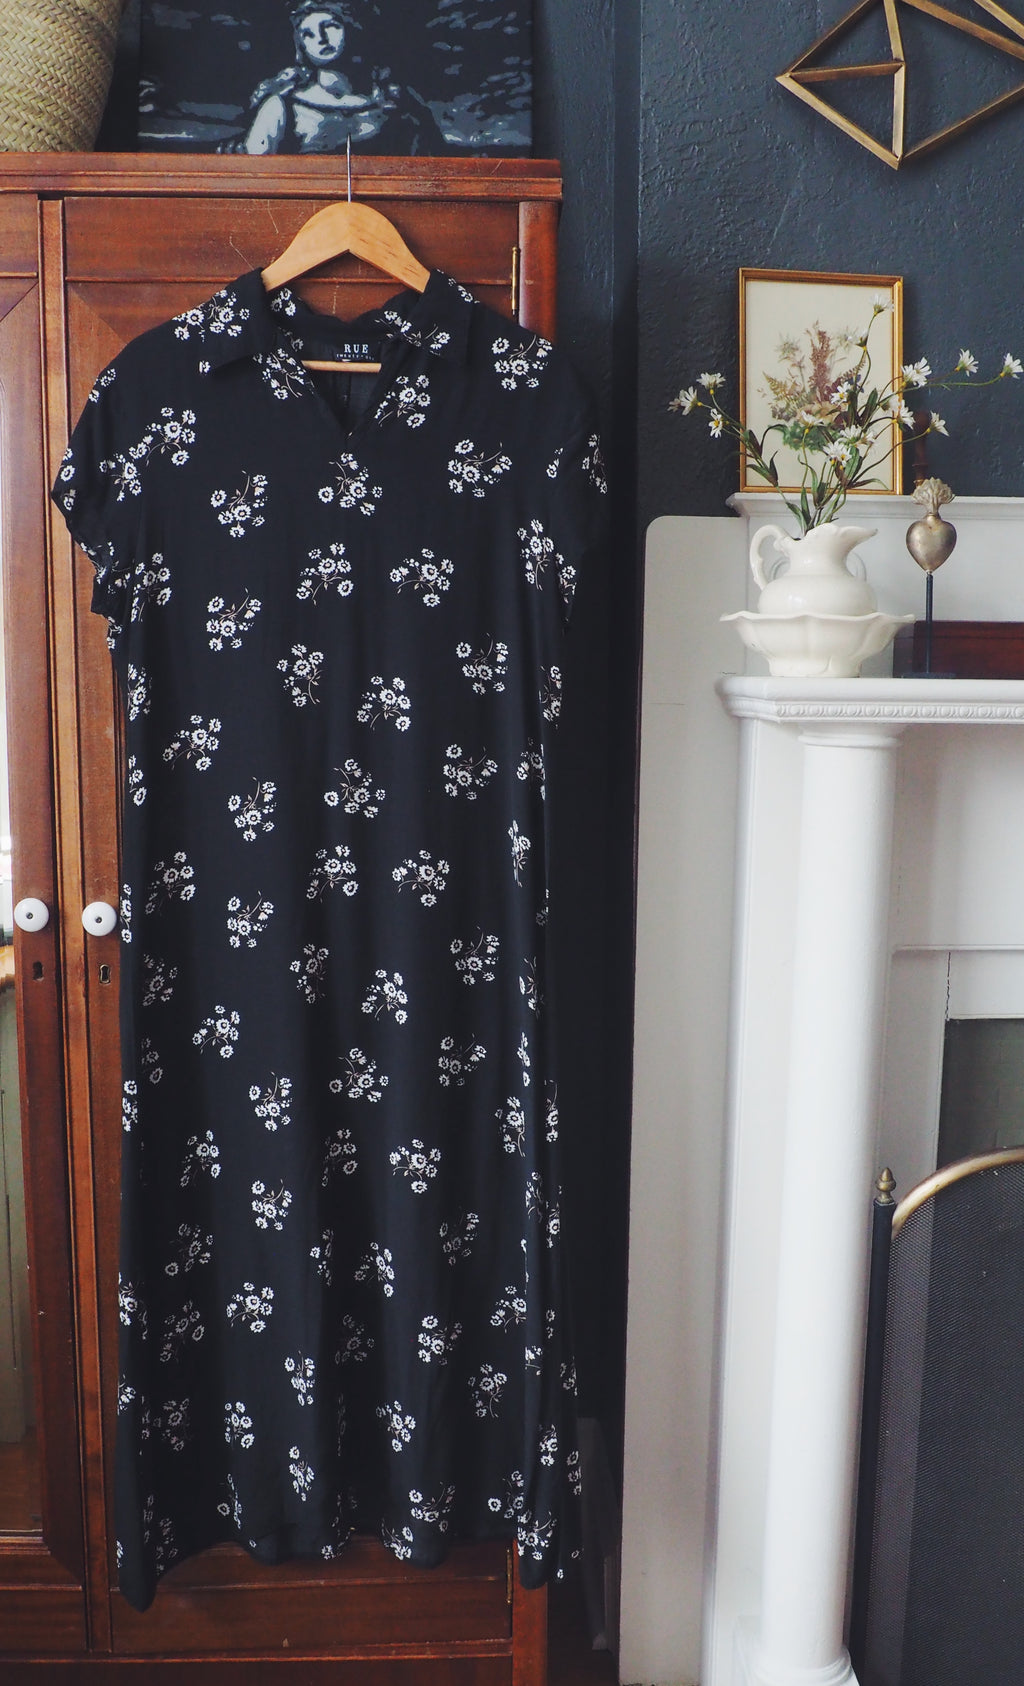 Vintage Made in the USA Black Floral Collared Midi Dress